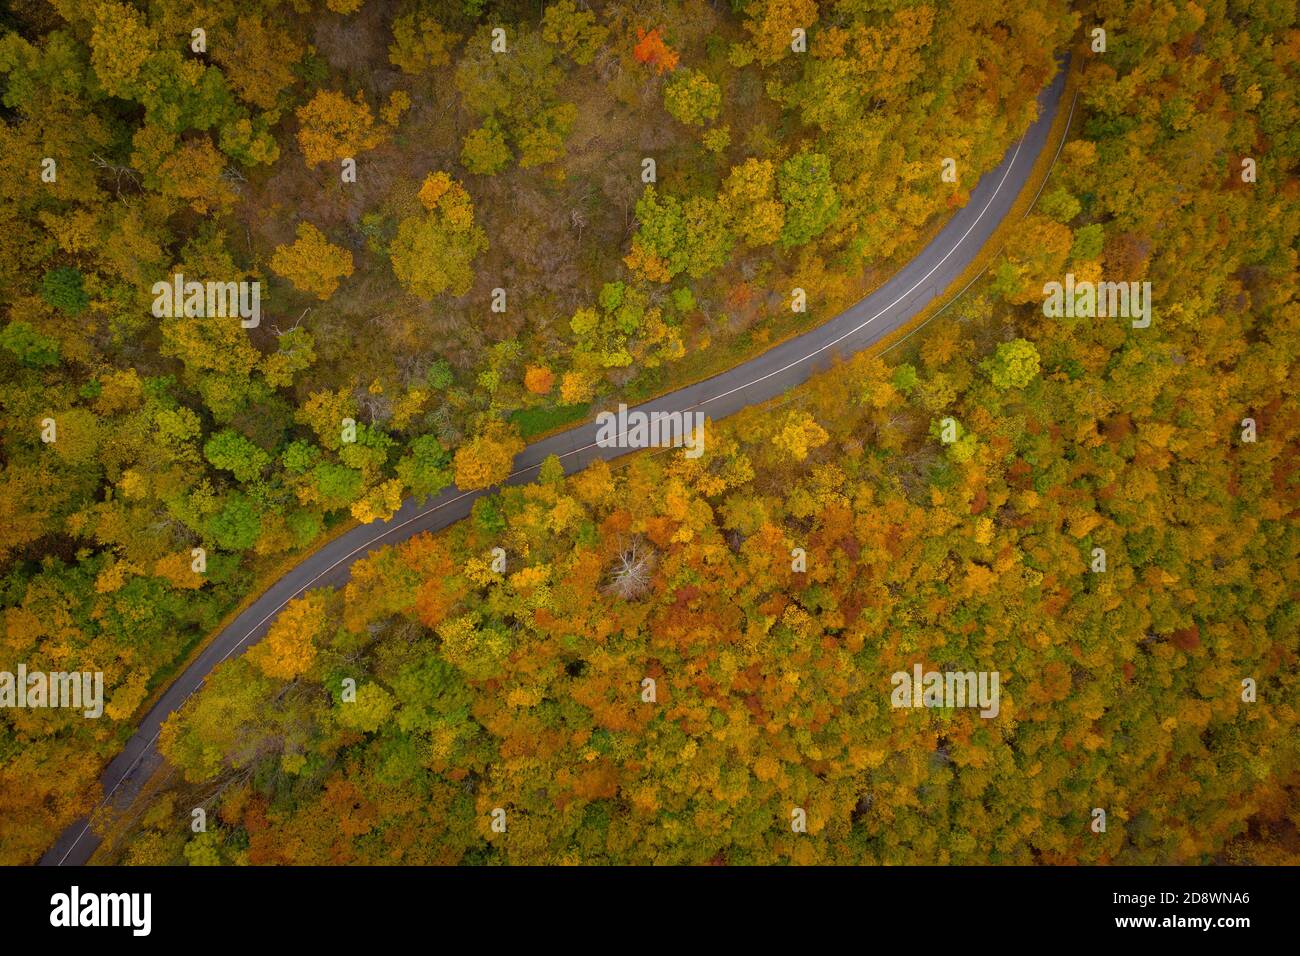 Visegrad, Hungary - Aerial view of curvy road going through the forest, autumn mood, warm autumn colors. Green, red yellow and orange colored trees. Stock Photo